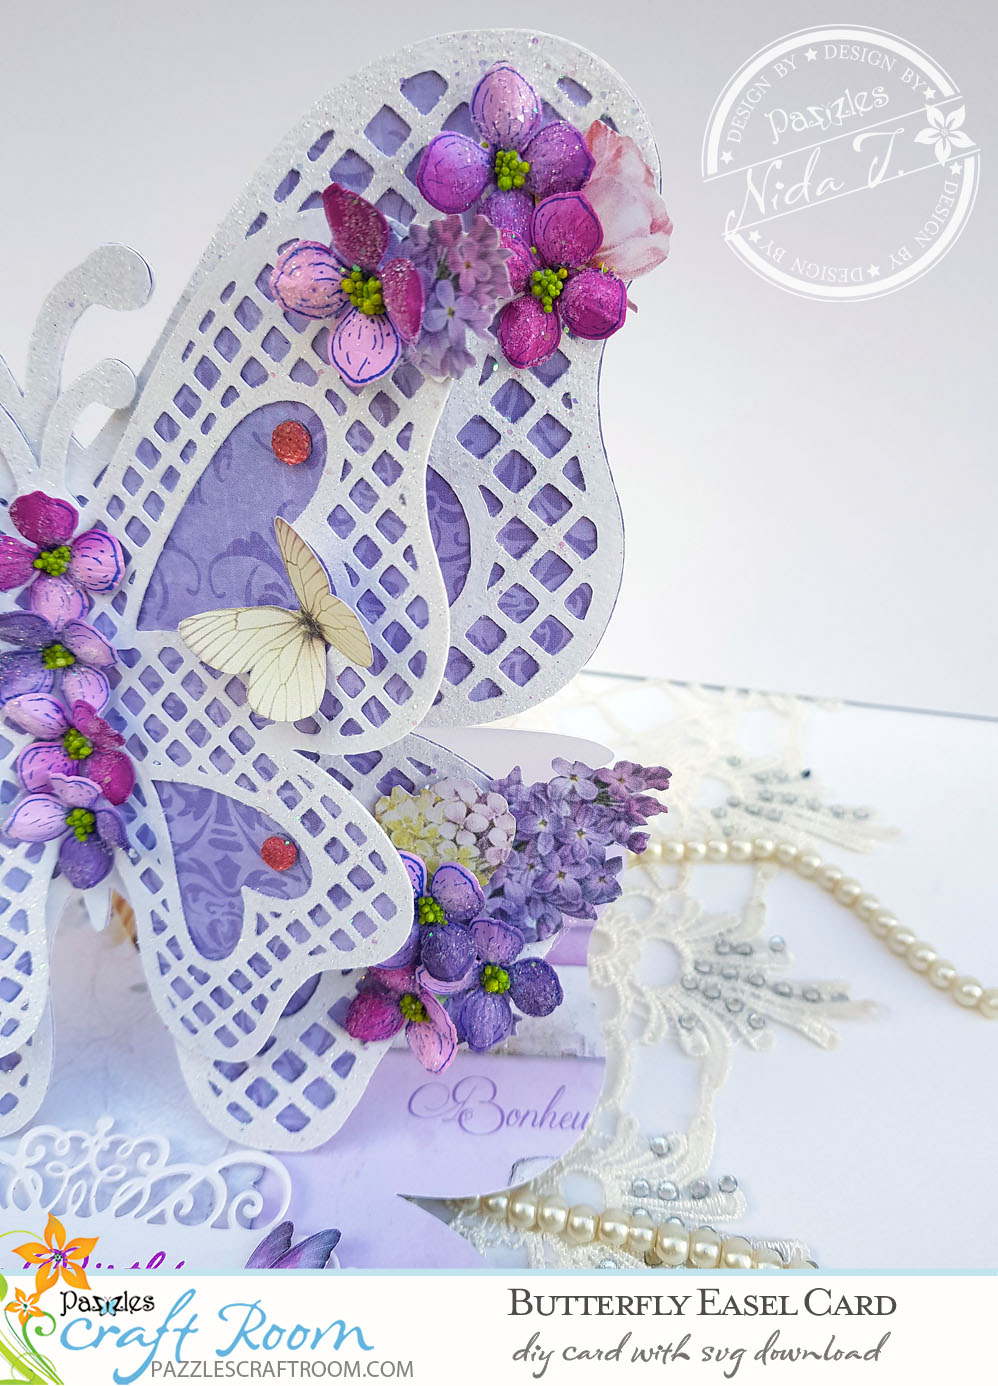 3D lace easel Card 